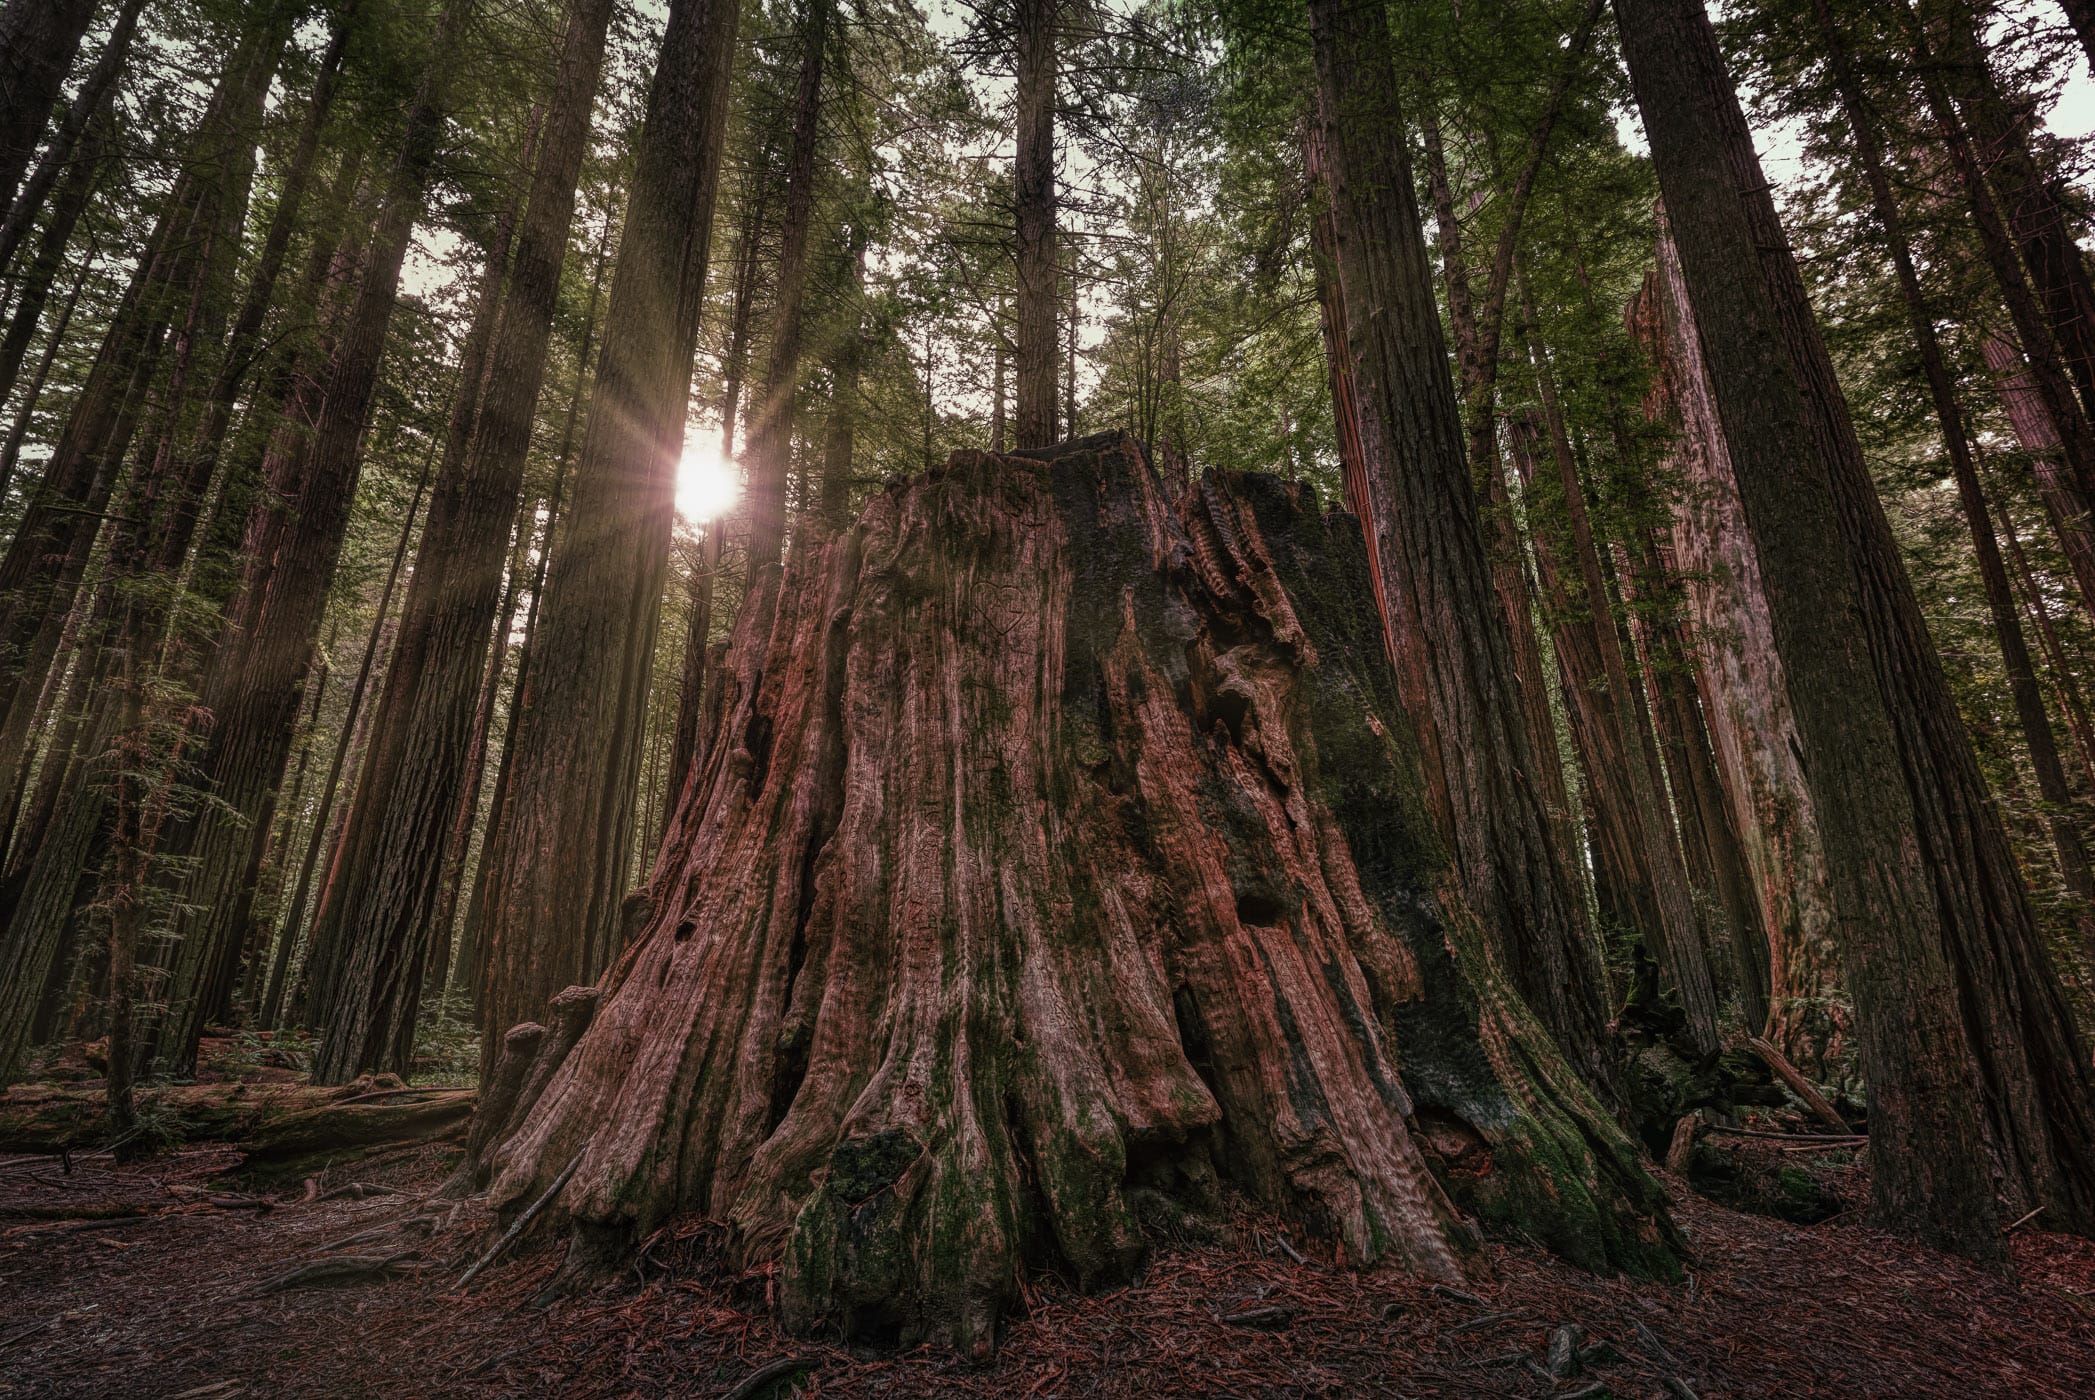 The stump of a Coast Redwood tree, spotted along the Avenue of the Giants, Humboldt Redwoods State Park, California.